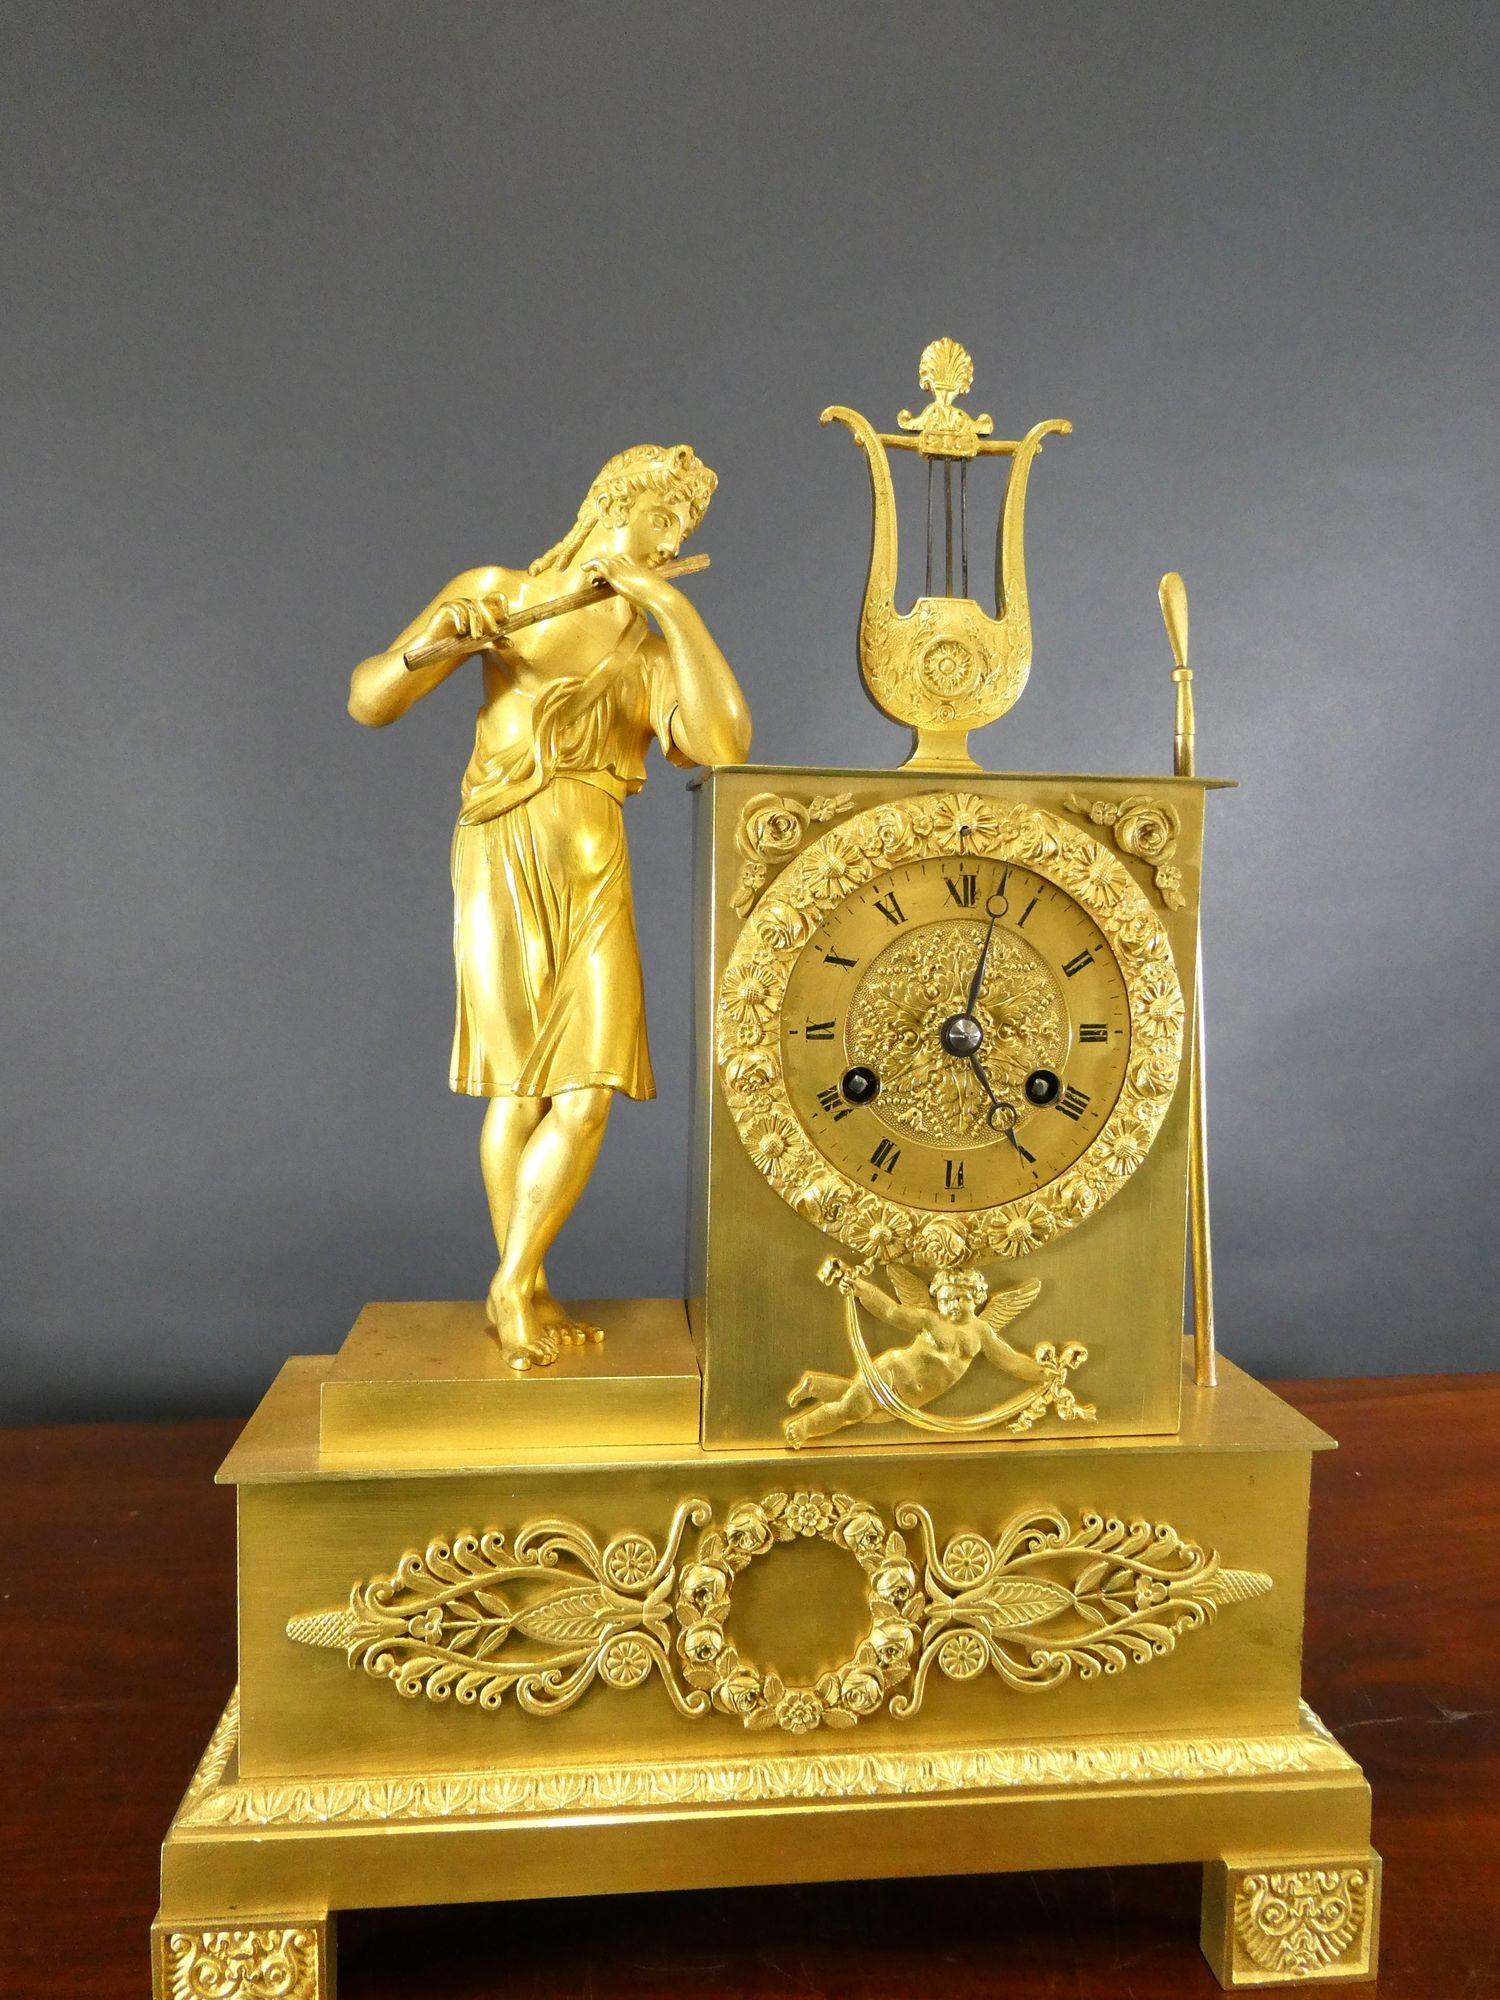 French Ormolu Mantel Clock
French mantel clock housed in an ormolu case with stepped base and decorated feet, floral, wreath and cherub decoration. To the side of the dial is a classical figure in robes playing the flute, the case surmounted by a